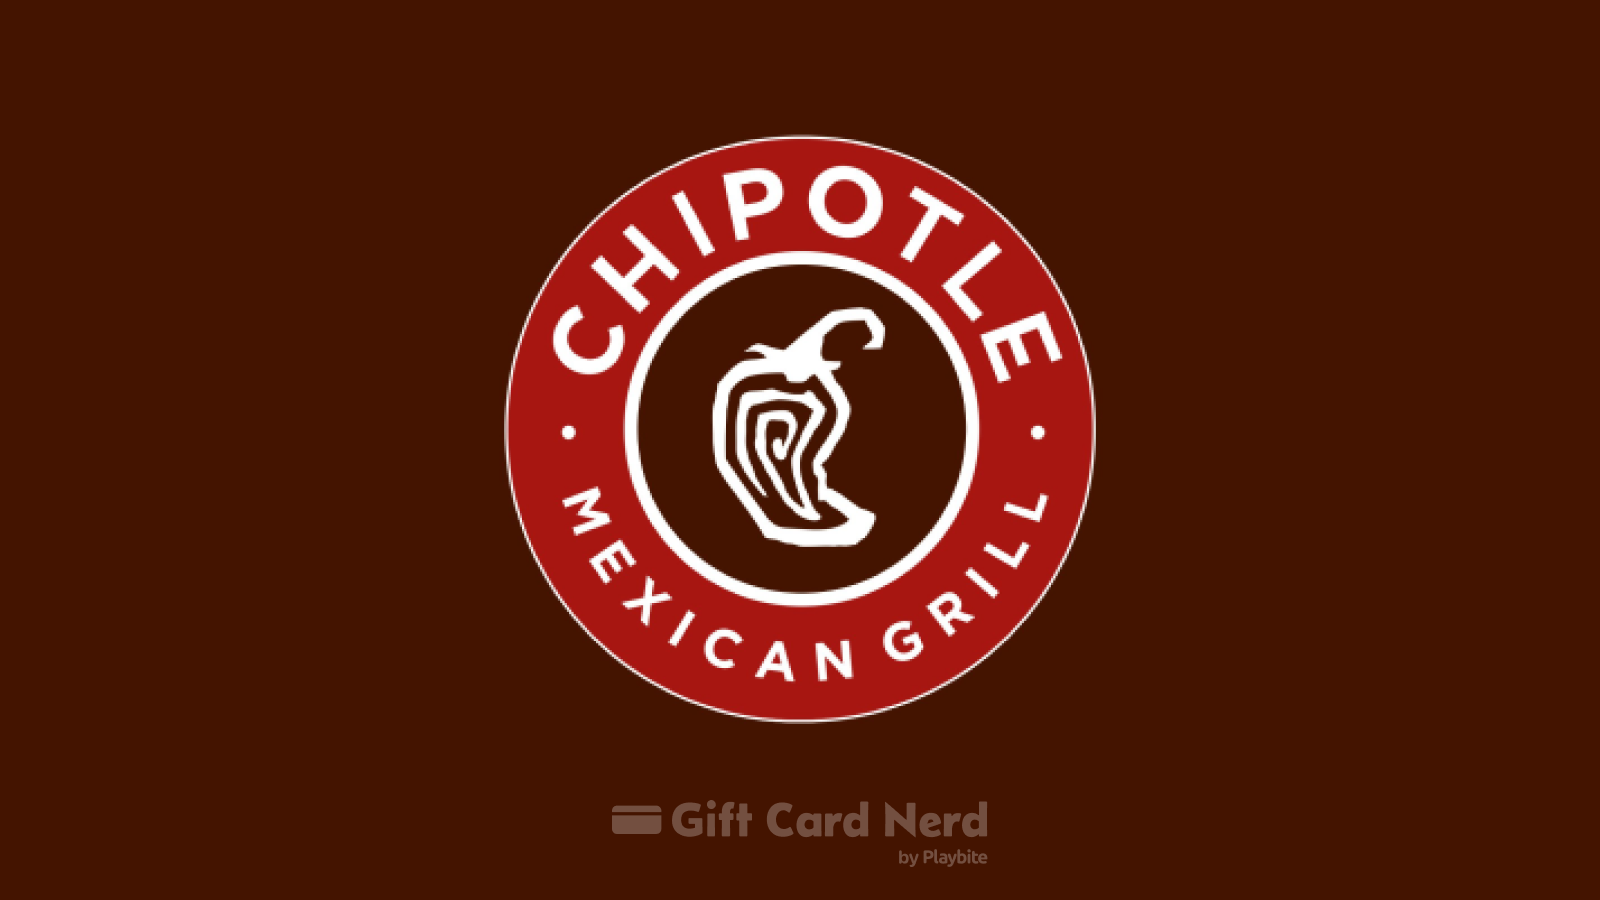 Can I Use a Chipotle Gift Card on PayPal?